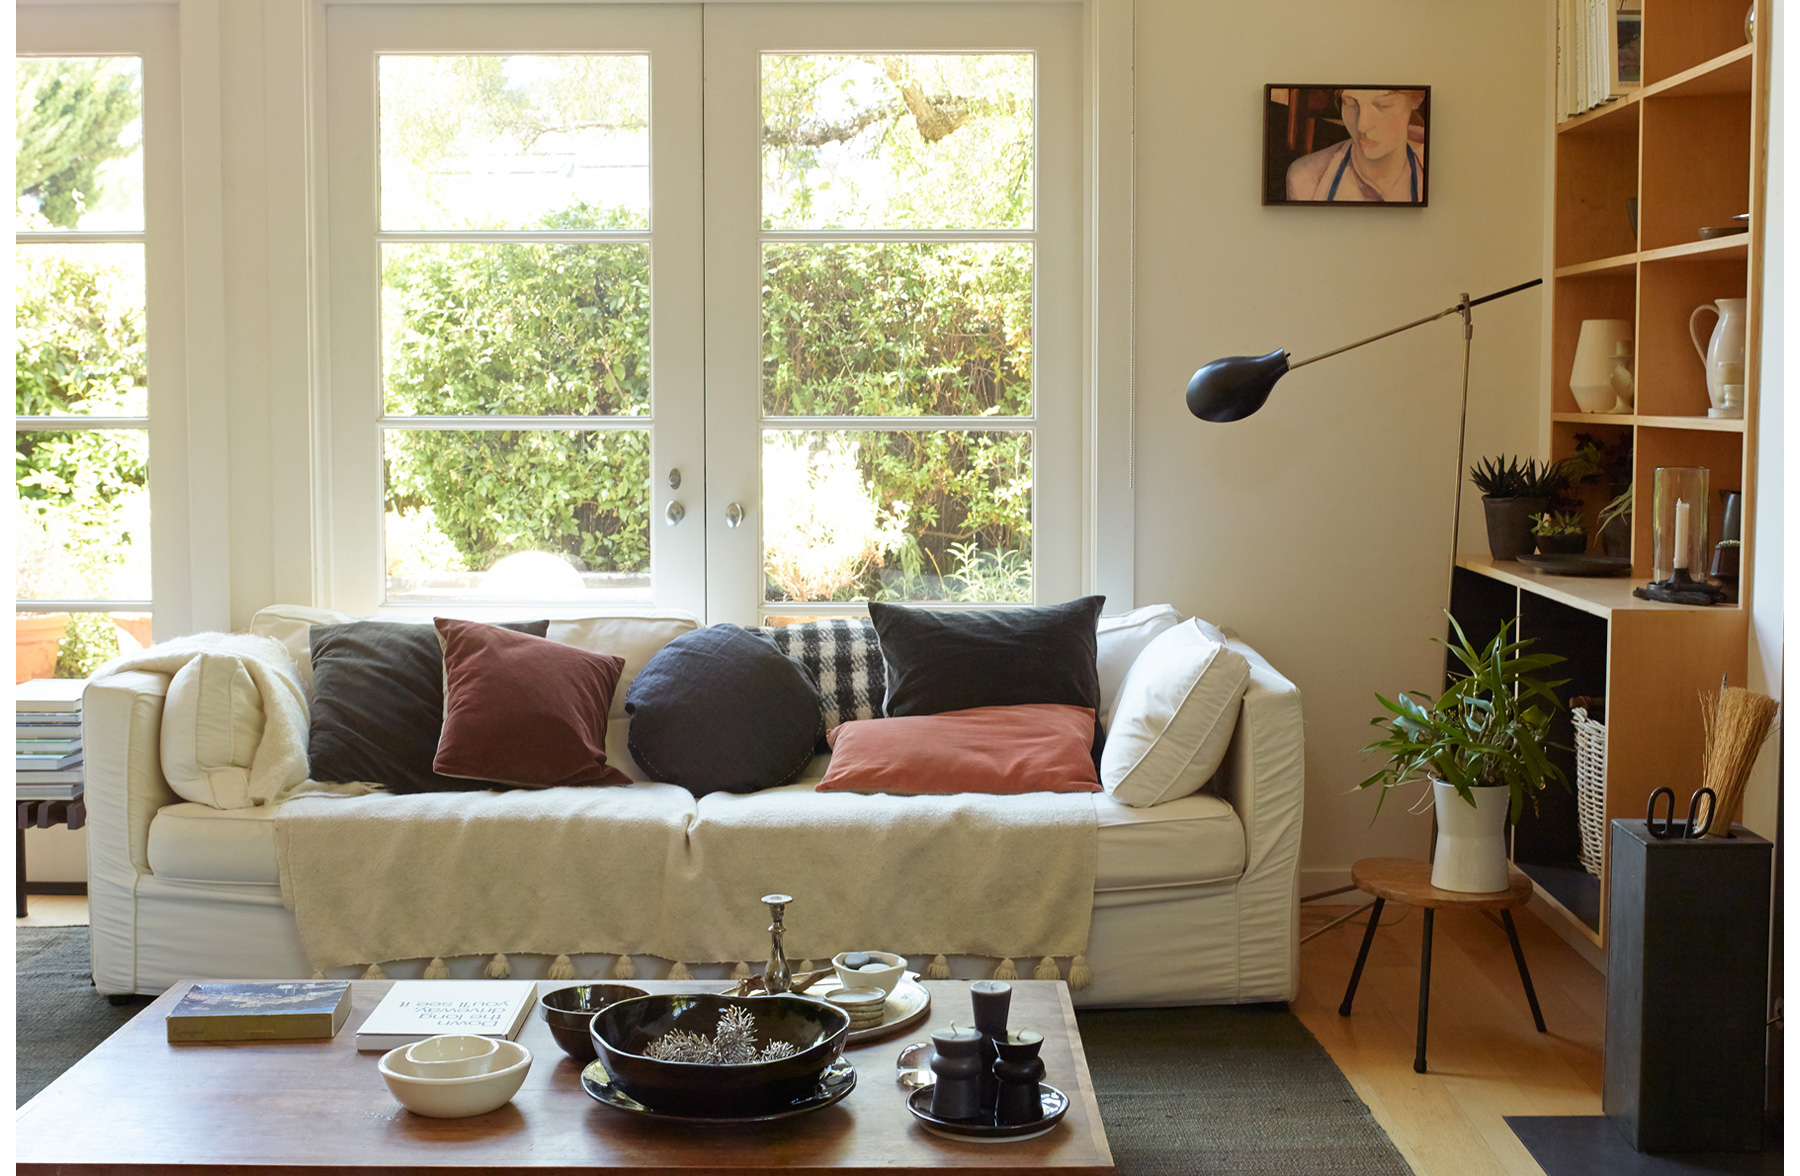 Julie Carlson and Josh Groves living room, Mill Valley, from Apiece Apart. Leslie Williamson photo.